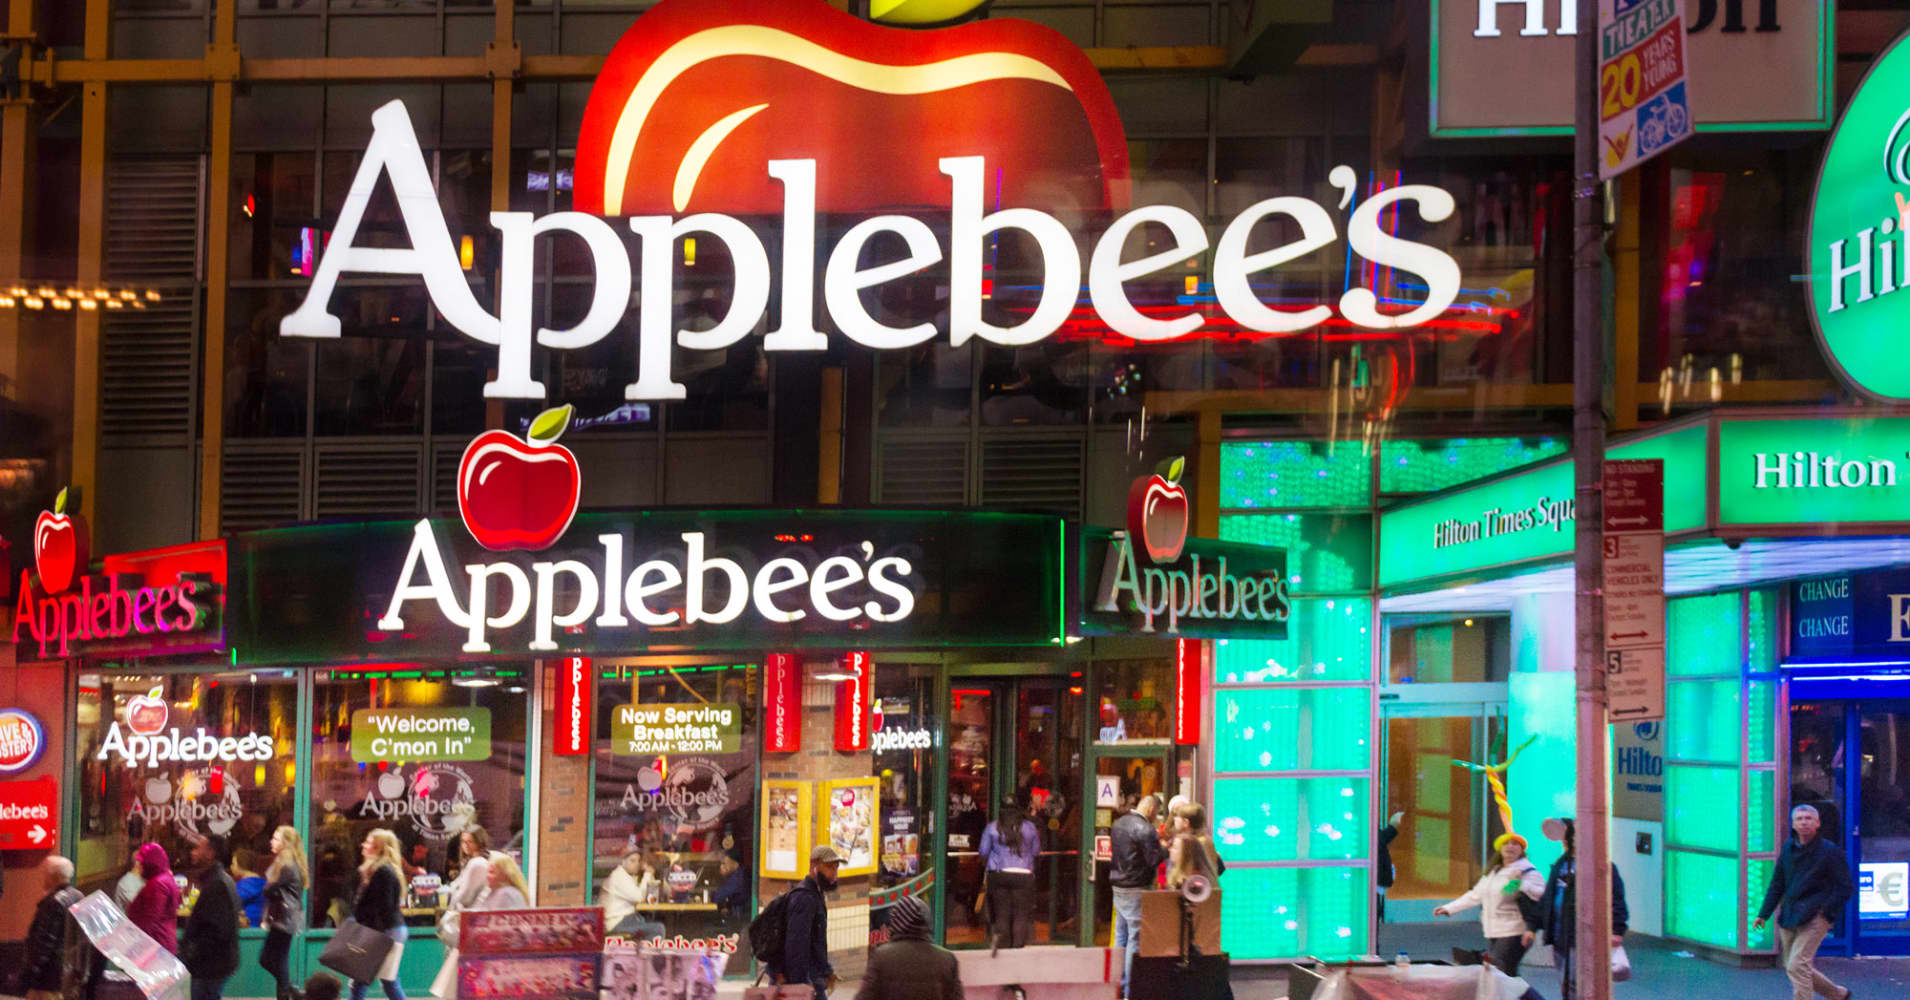 Applebee's plans to pare as many as 80 locations